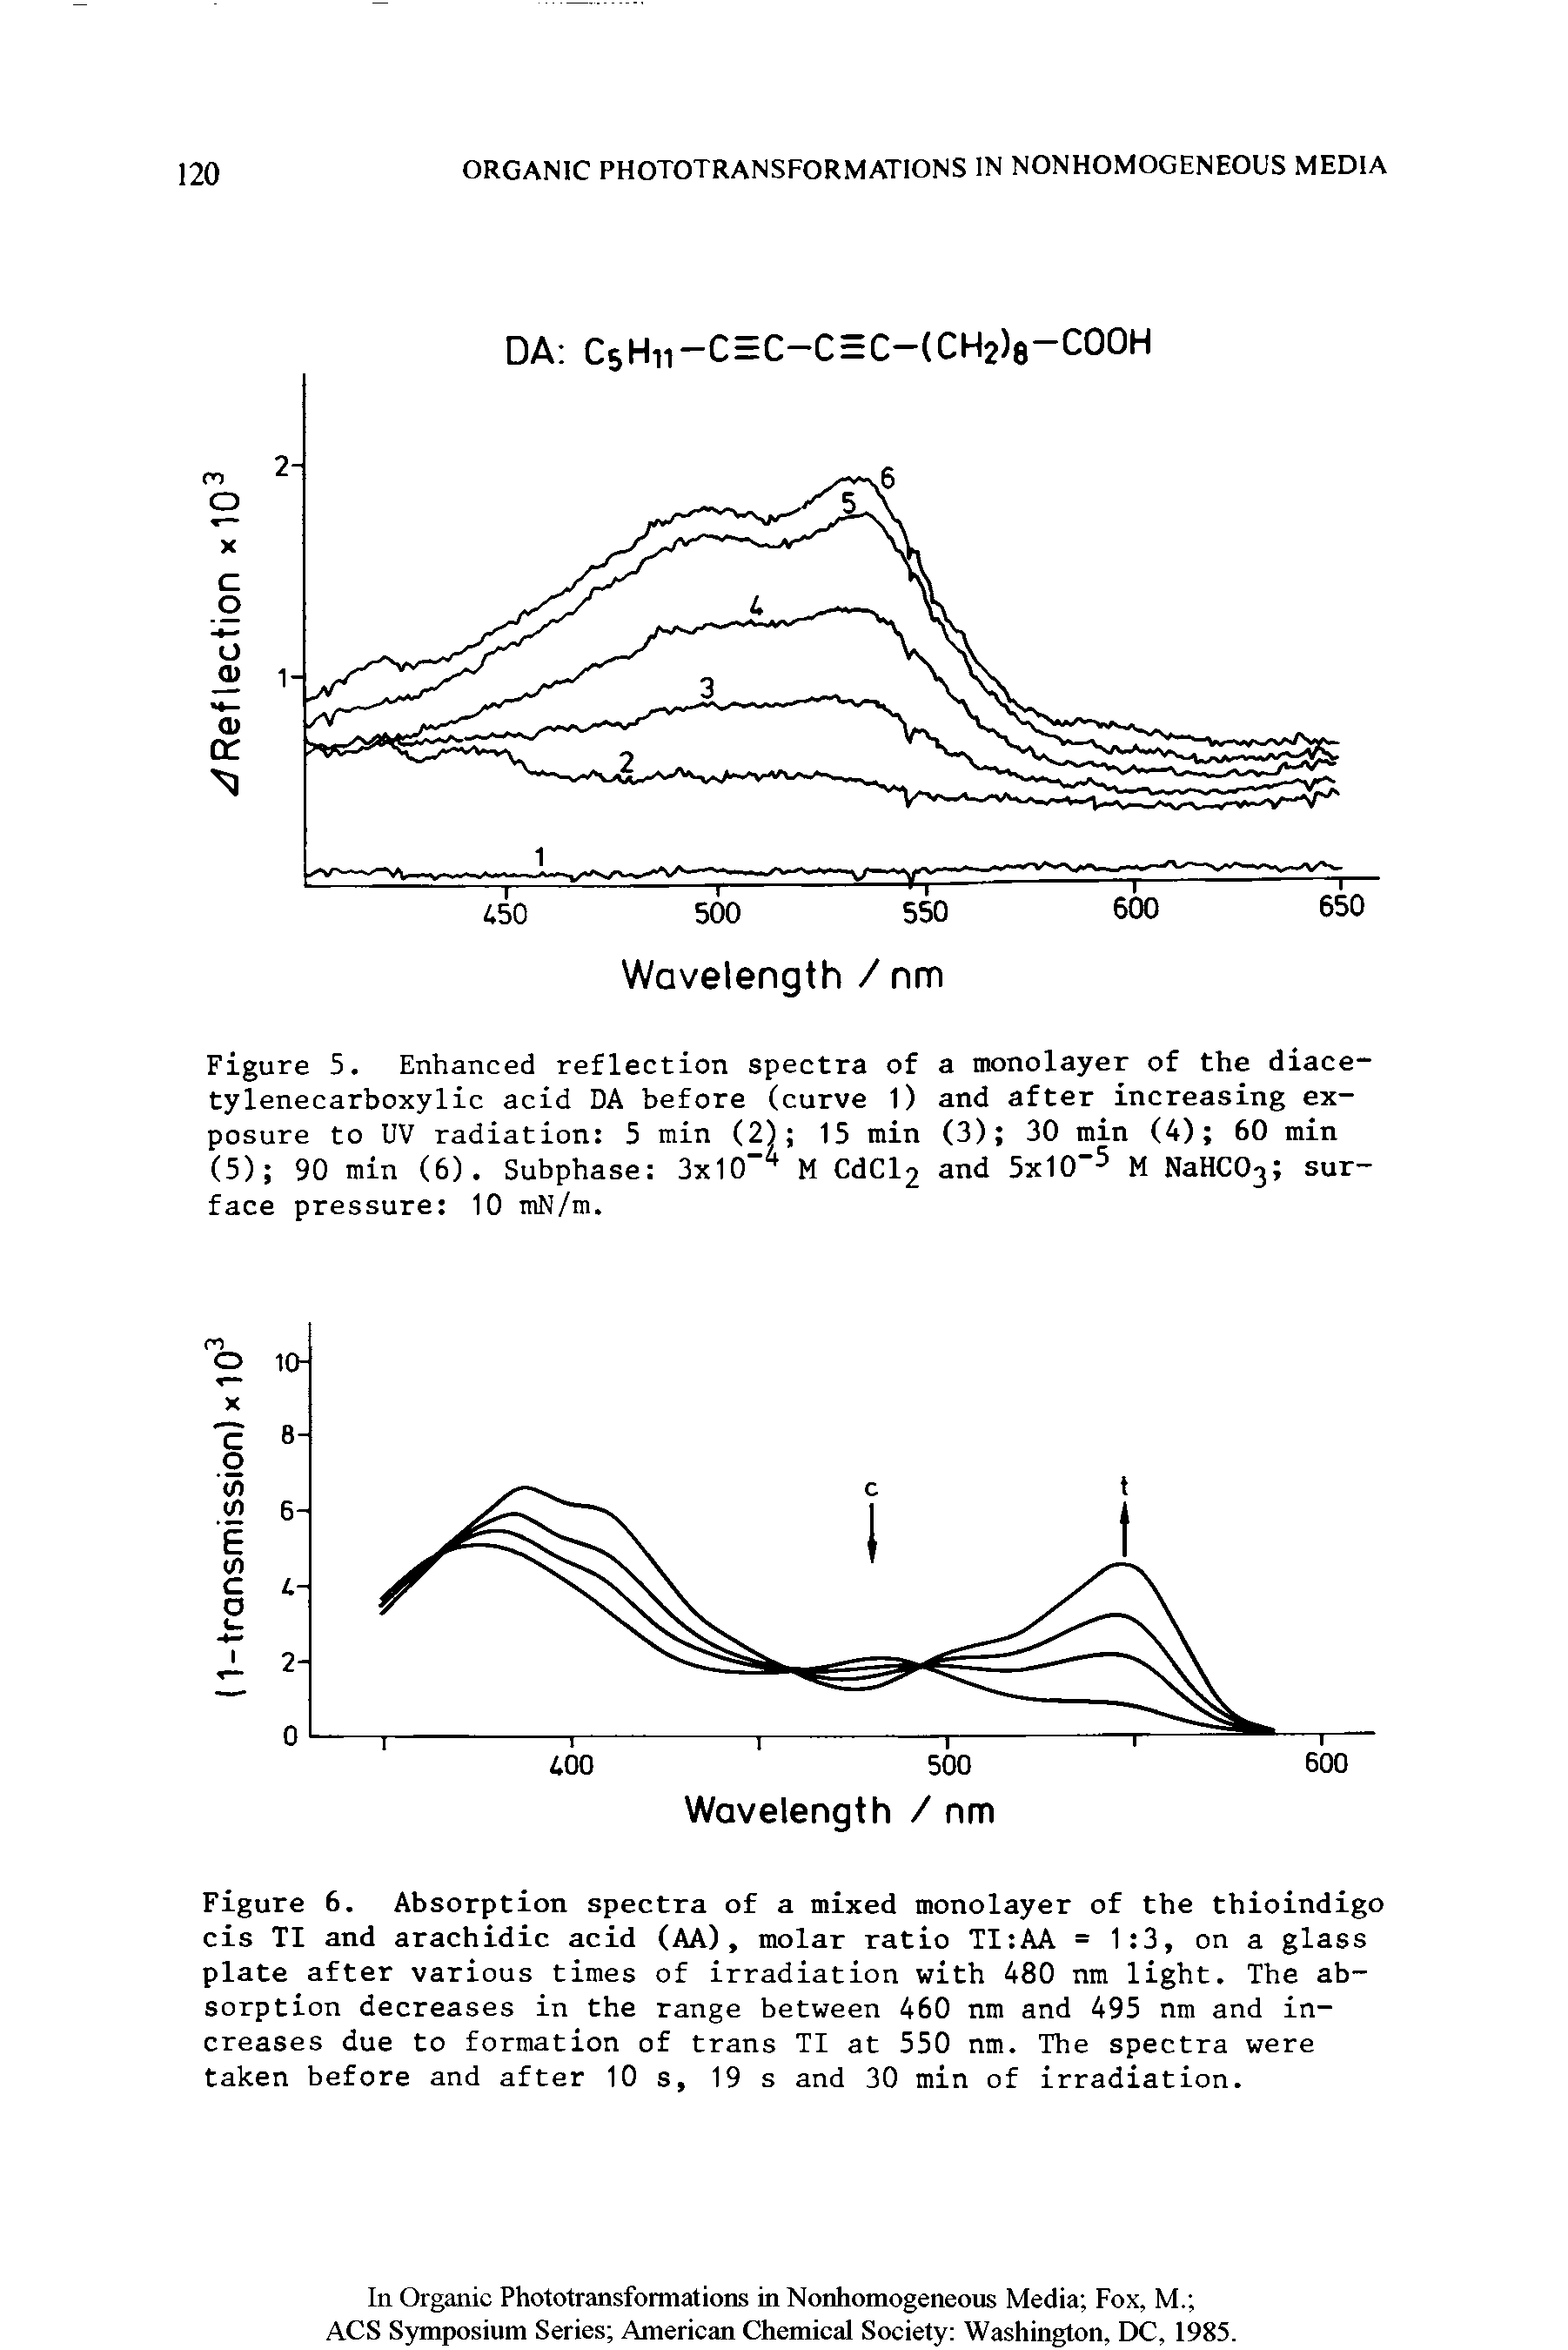 Figure 5. Enhanced reflection spectra of a monolayer of the diace-tylenecarboxylic acid DA before (curve 1) and after increasing exposure to UV radiation 5 min (2) 15 min (3) 30 min (4) 60 min (5) 90 min (6). Subphase 3x10- M CdCl2 and 5x10 M NaHCOj surface pressure 10 mN/m.